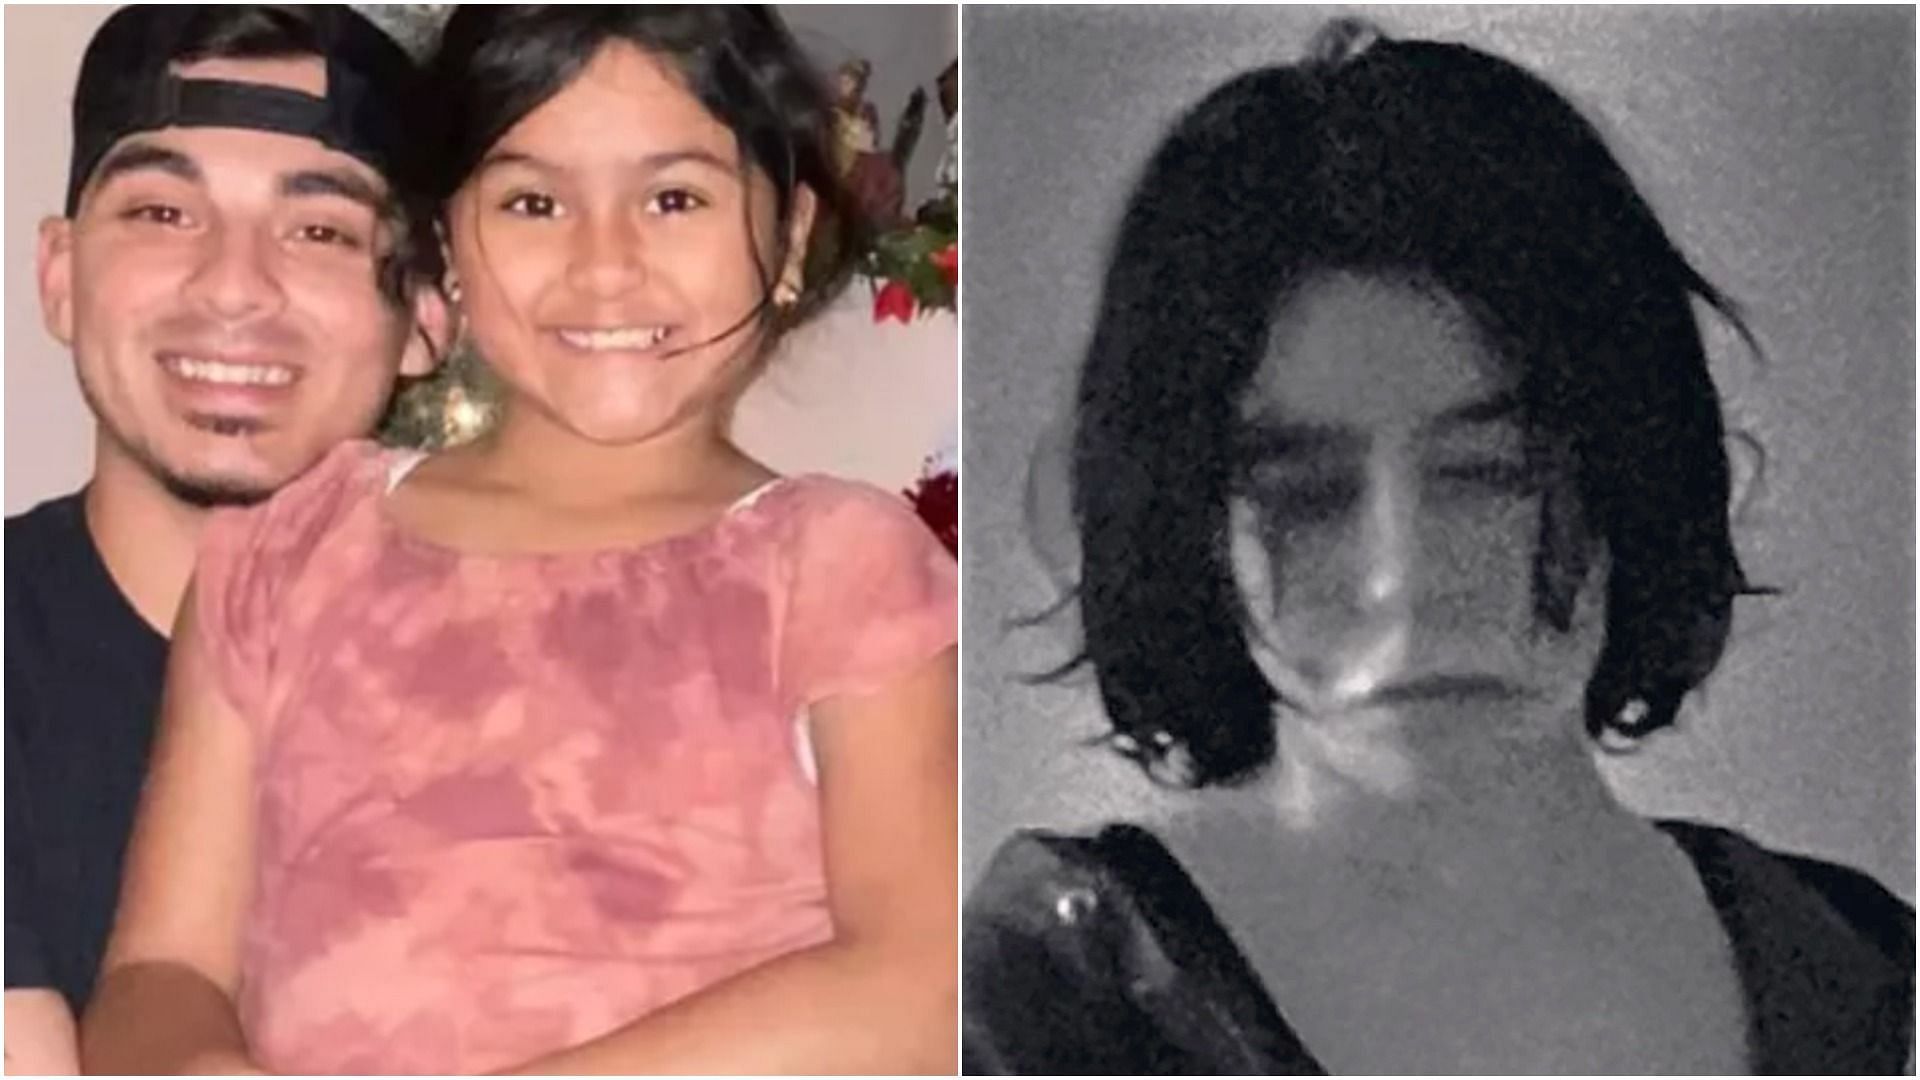 Amerie Jo Garza was identified as one of the 21 victims killed by Salvador Ramos (Photos via gofundme and Instagram)